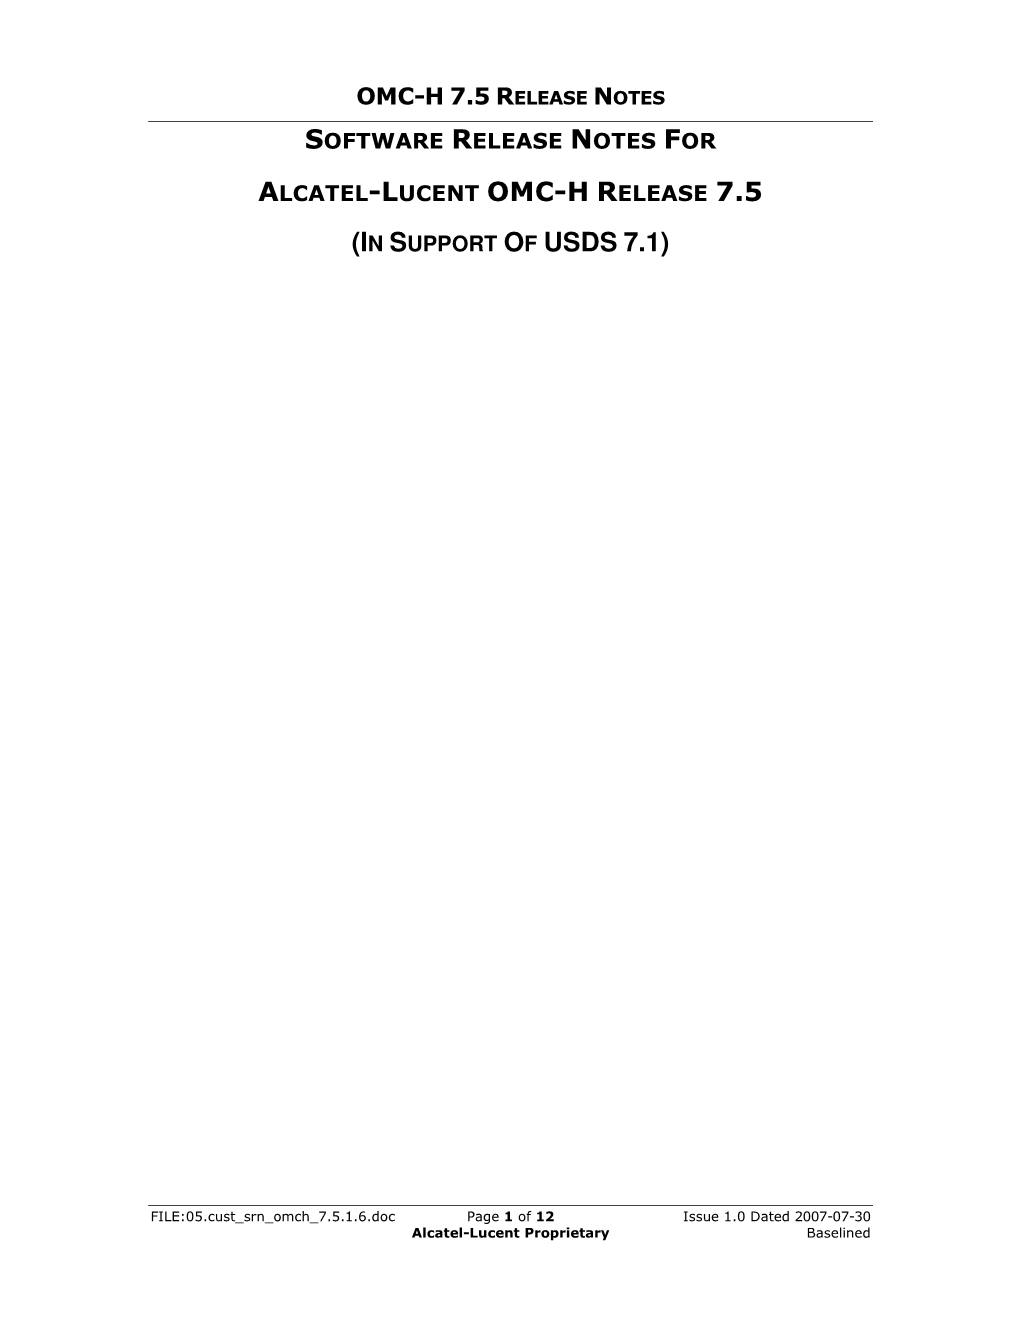 Software Release Notes for Alcatel-Lucent Omc-H